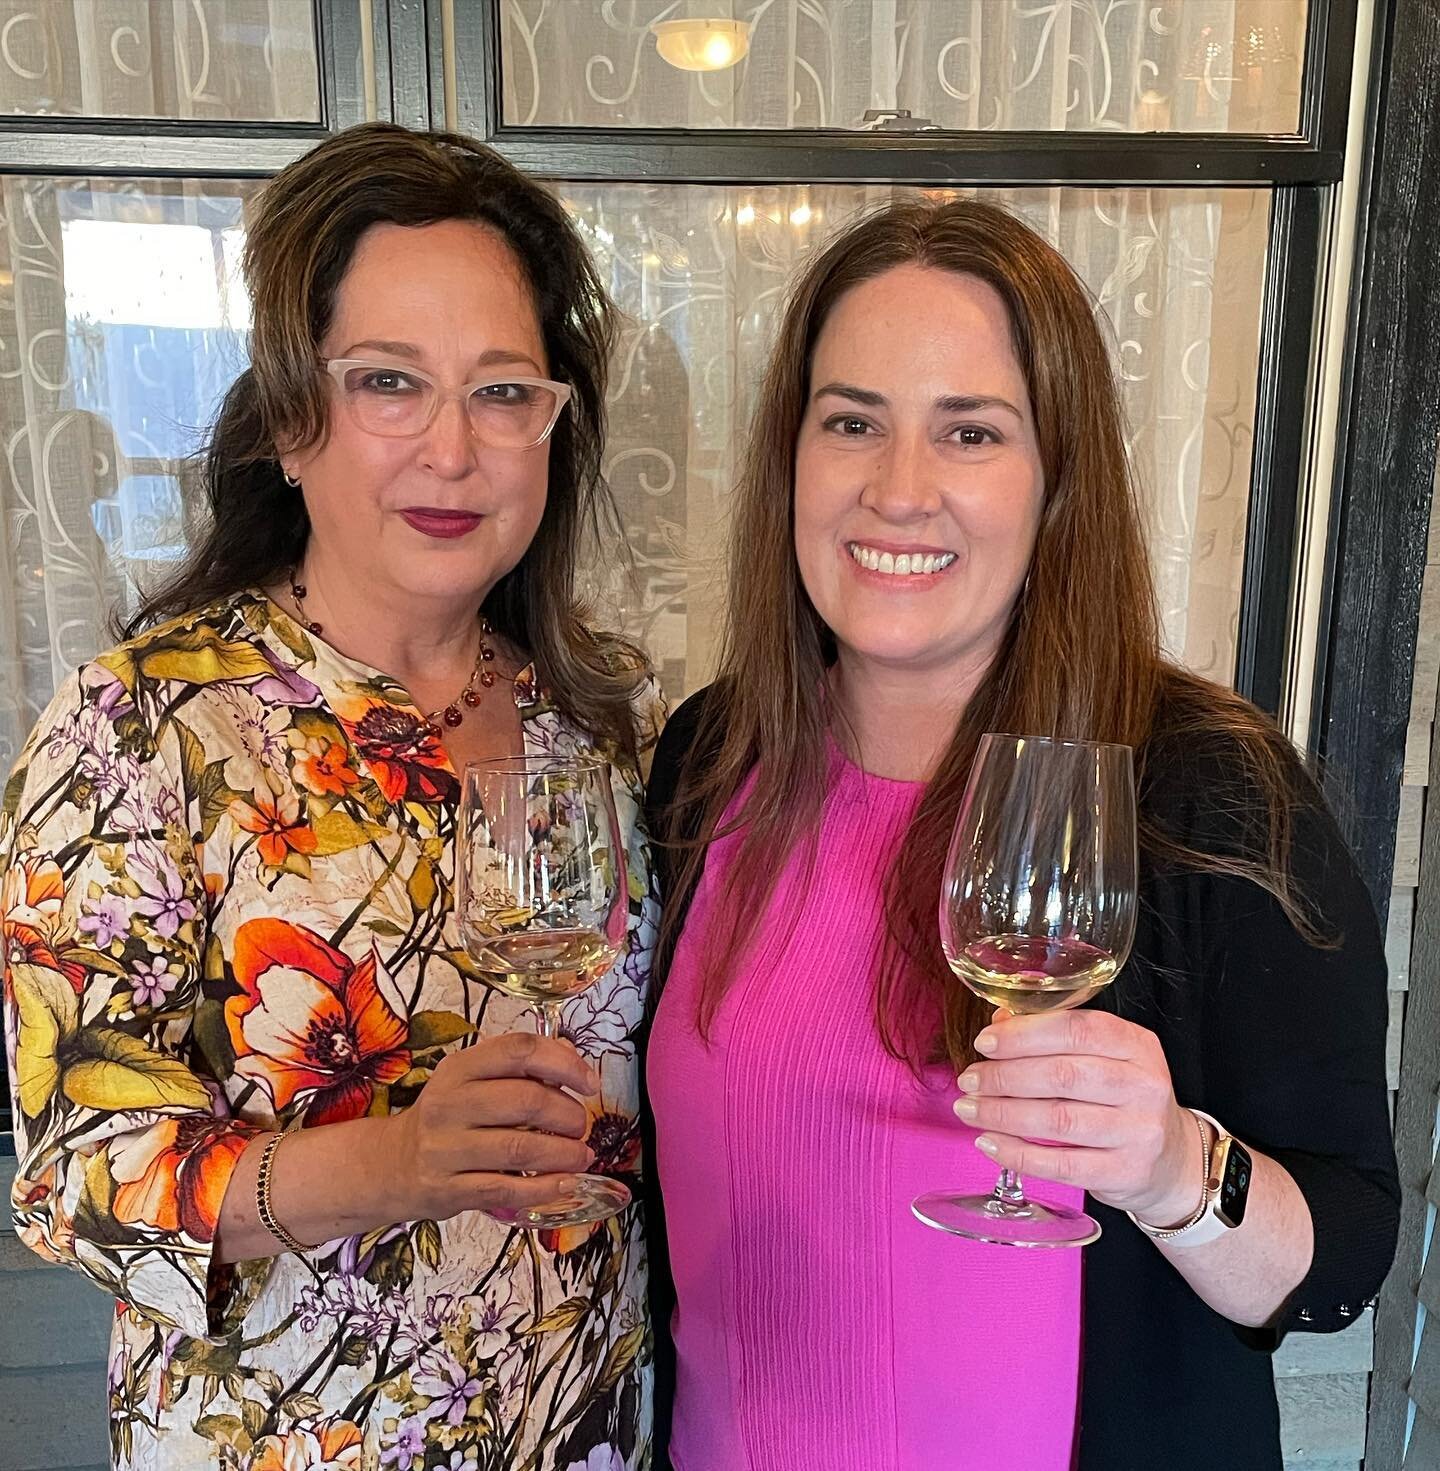 With Ferrari Carano&rsquo;s winemaker the lovely Natalie West having a glass of their famous Fum&eacute; Blanc 🤍

🌸 Wine tasting and fundraiser event for the WOW Charities @wowcharities supporting @hawctalk the Houston Area Women&rsquo;s Center 

?